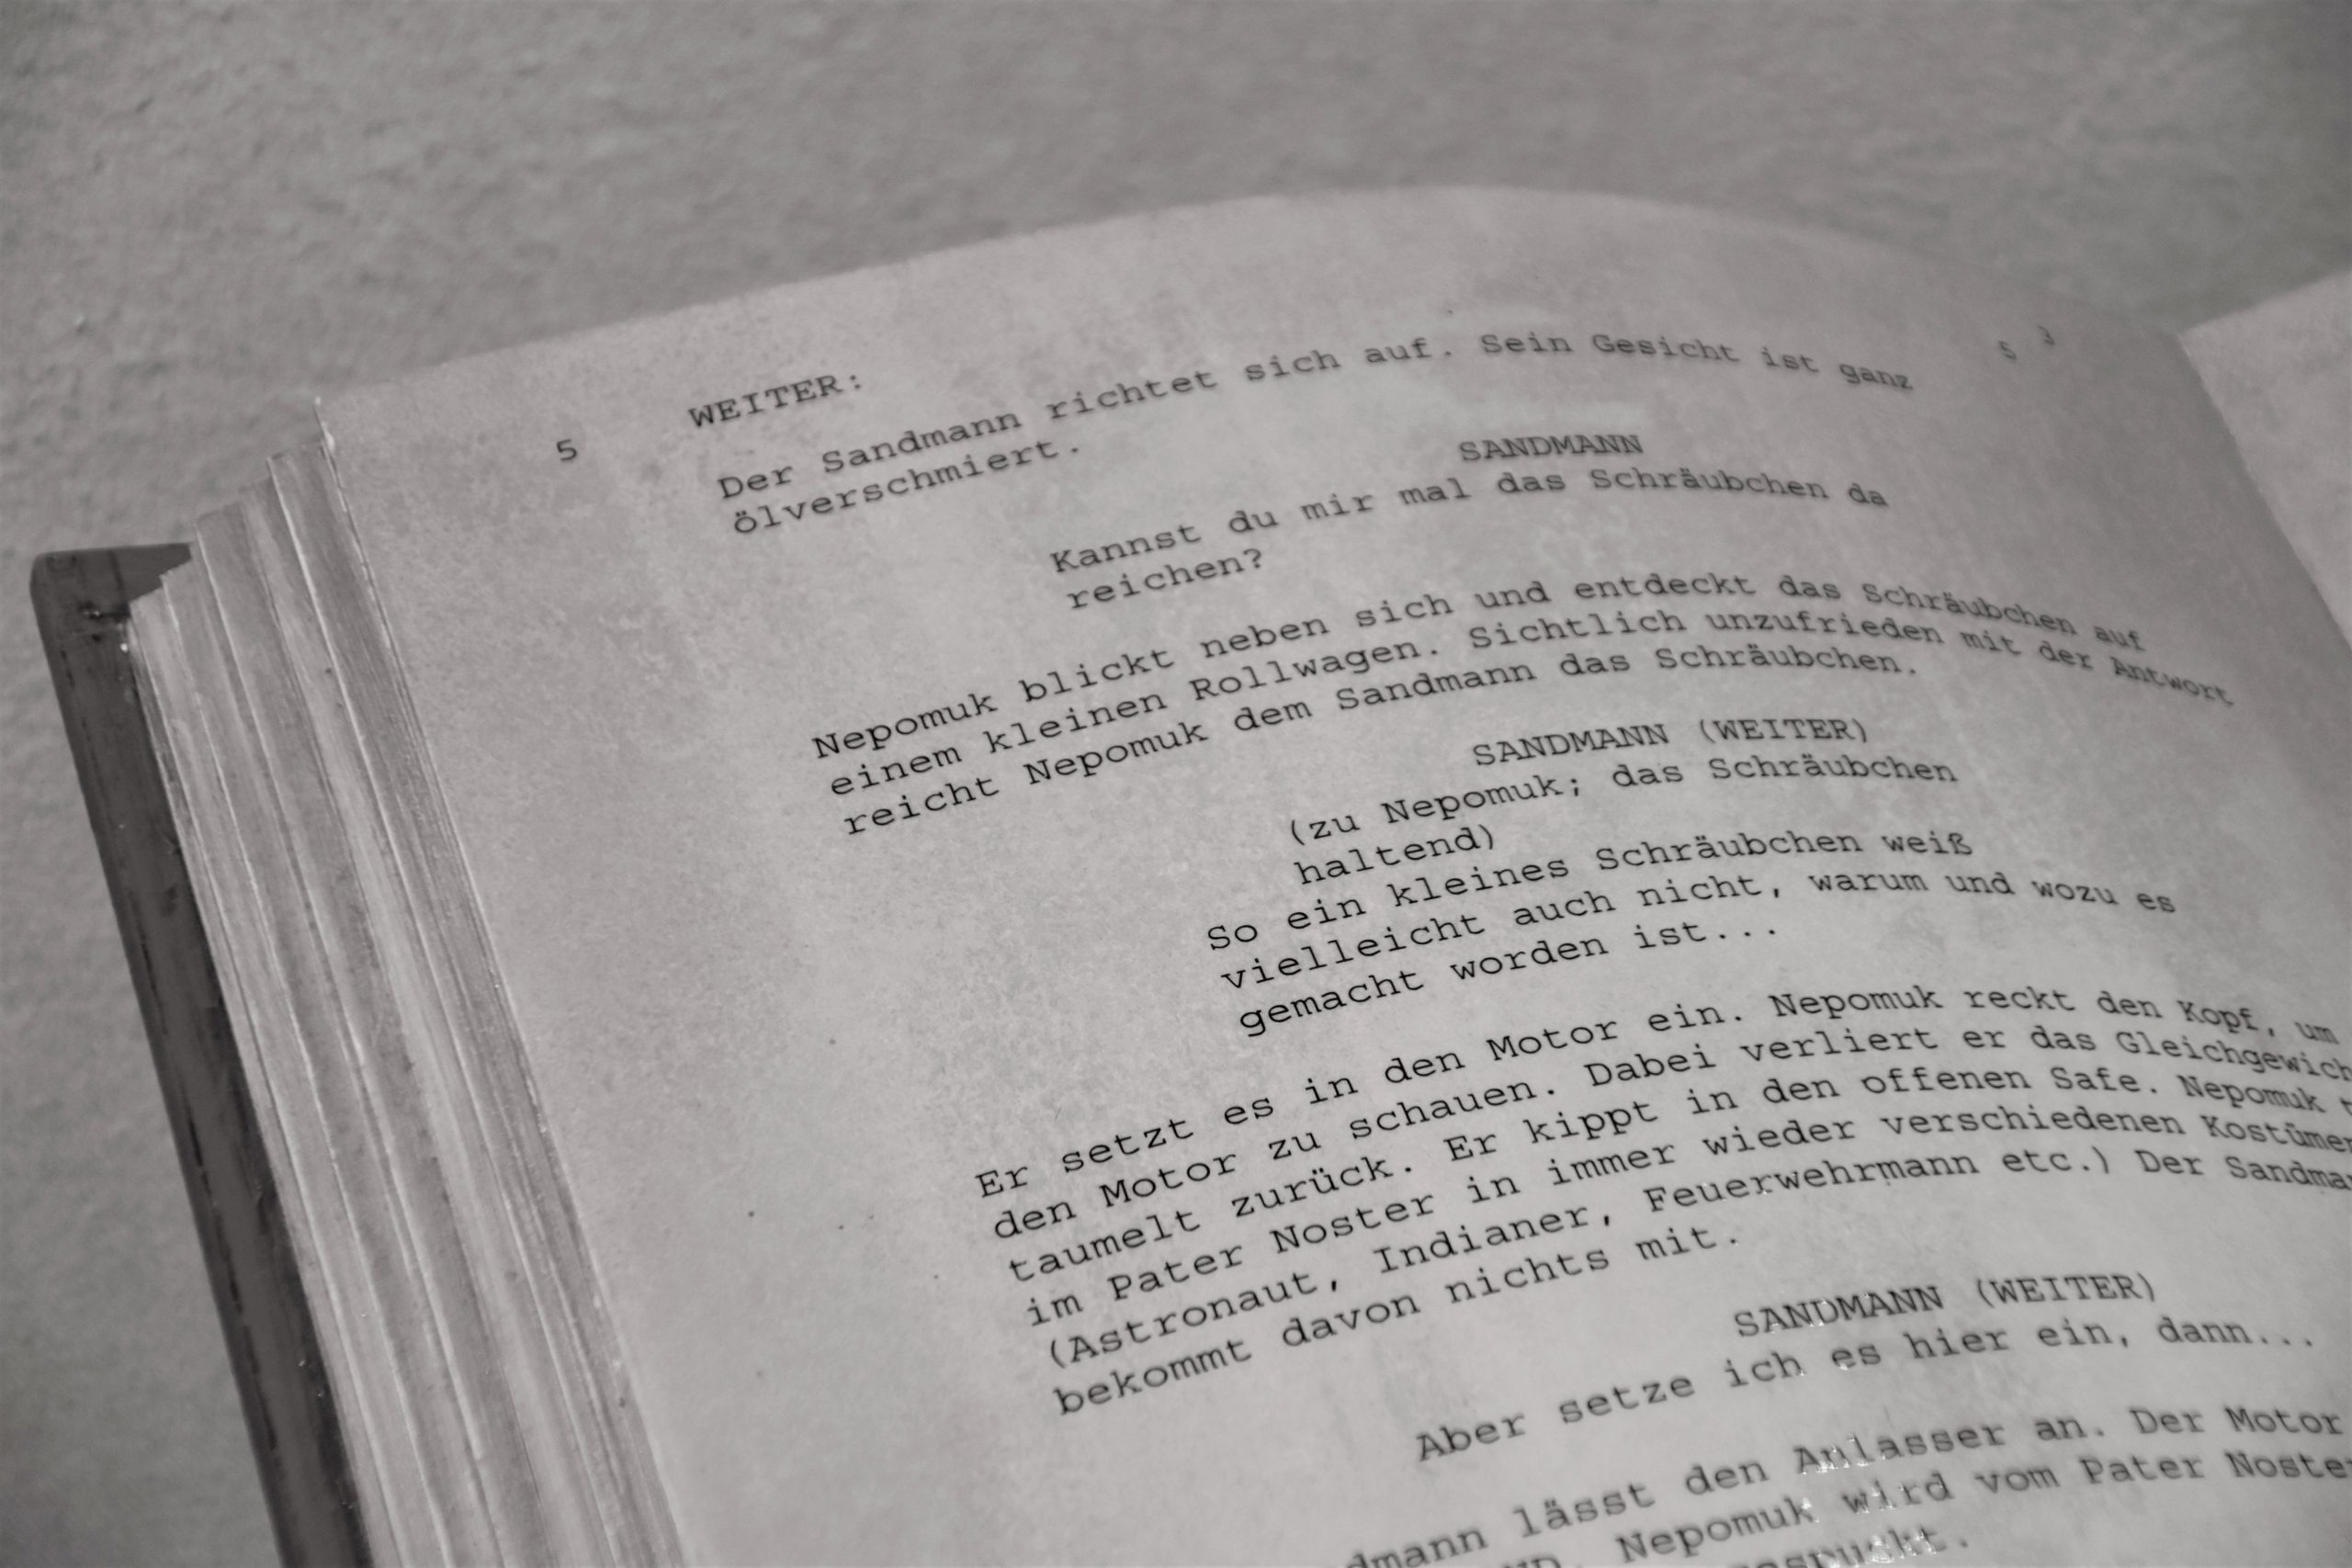 How to prepare a professional video resume - An image of a film script